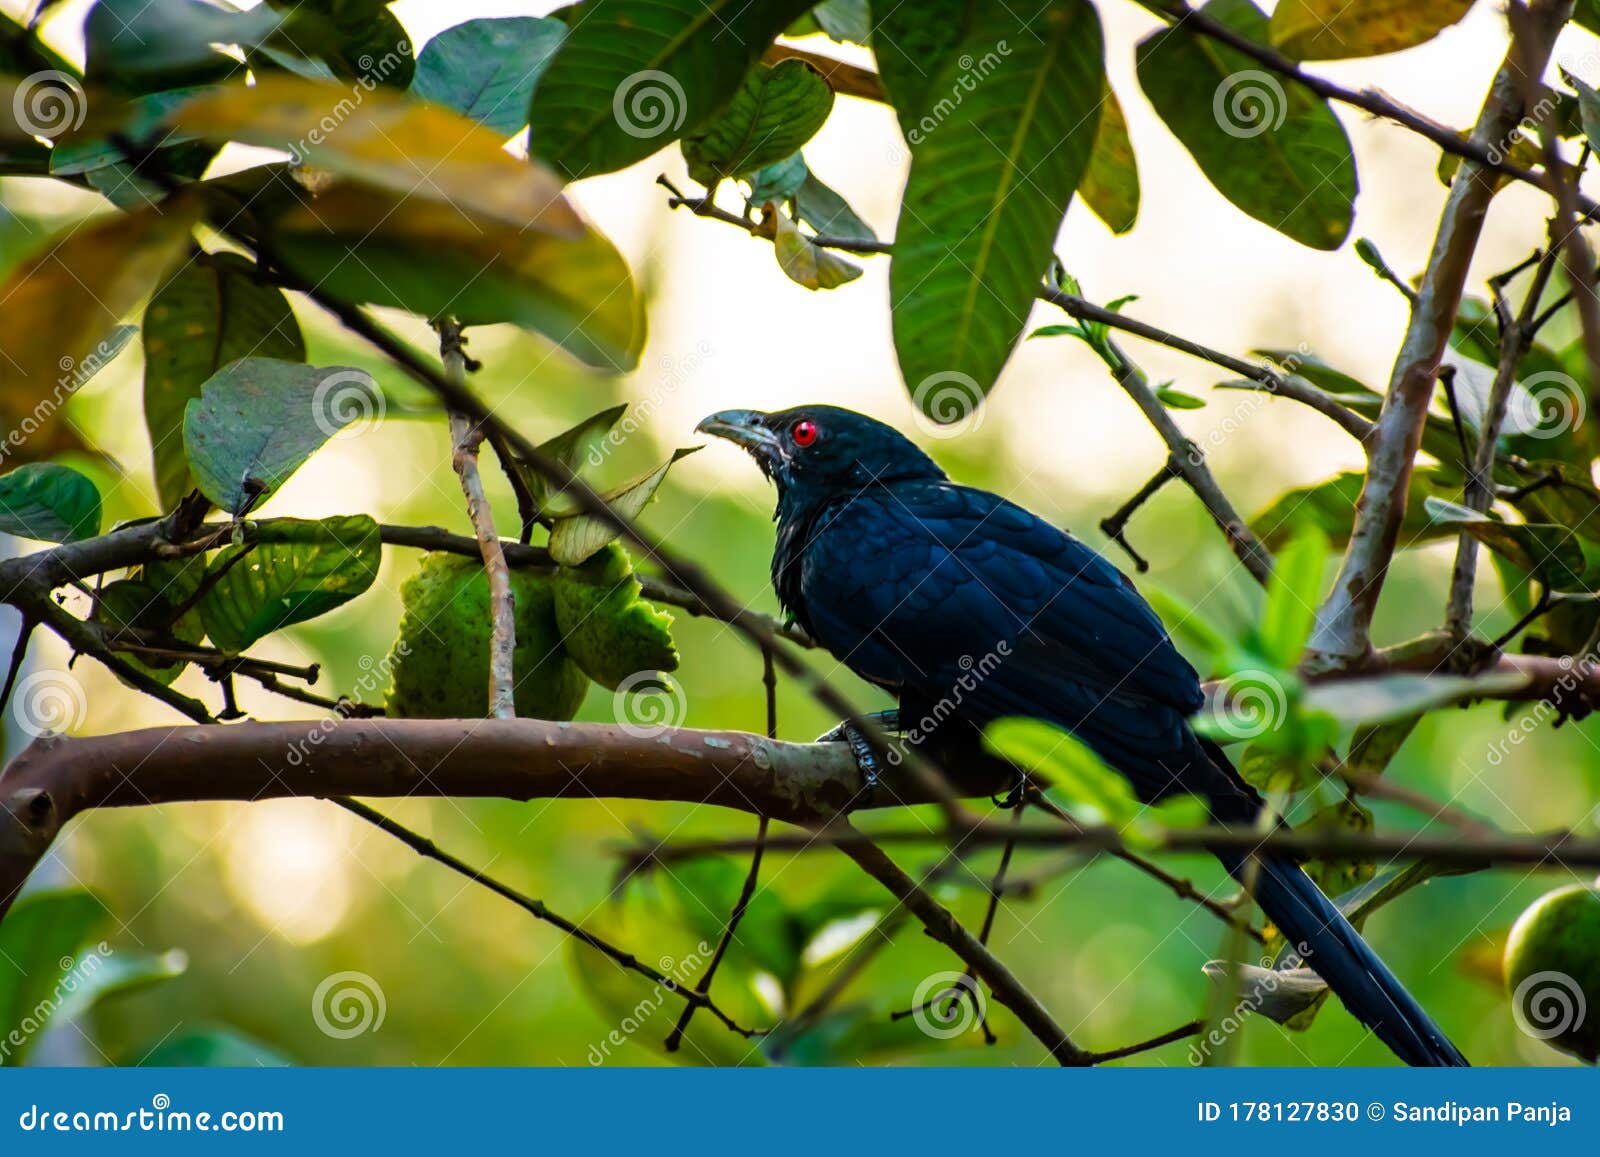 Cuckoo Images and Stock Photos. 3,707 Cuckoo photography and royalty free  pictures available to download from thousands of stock photo providers.